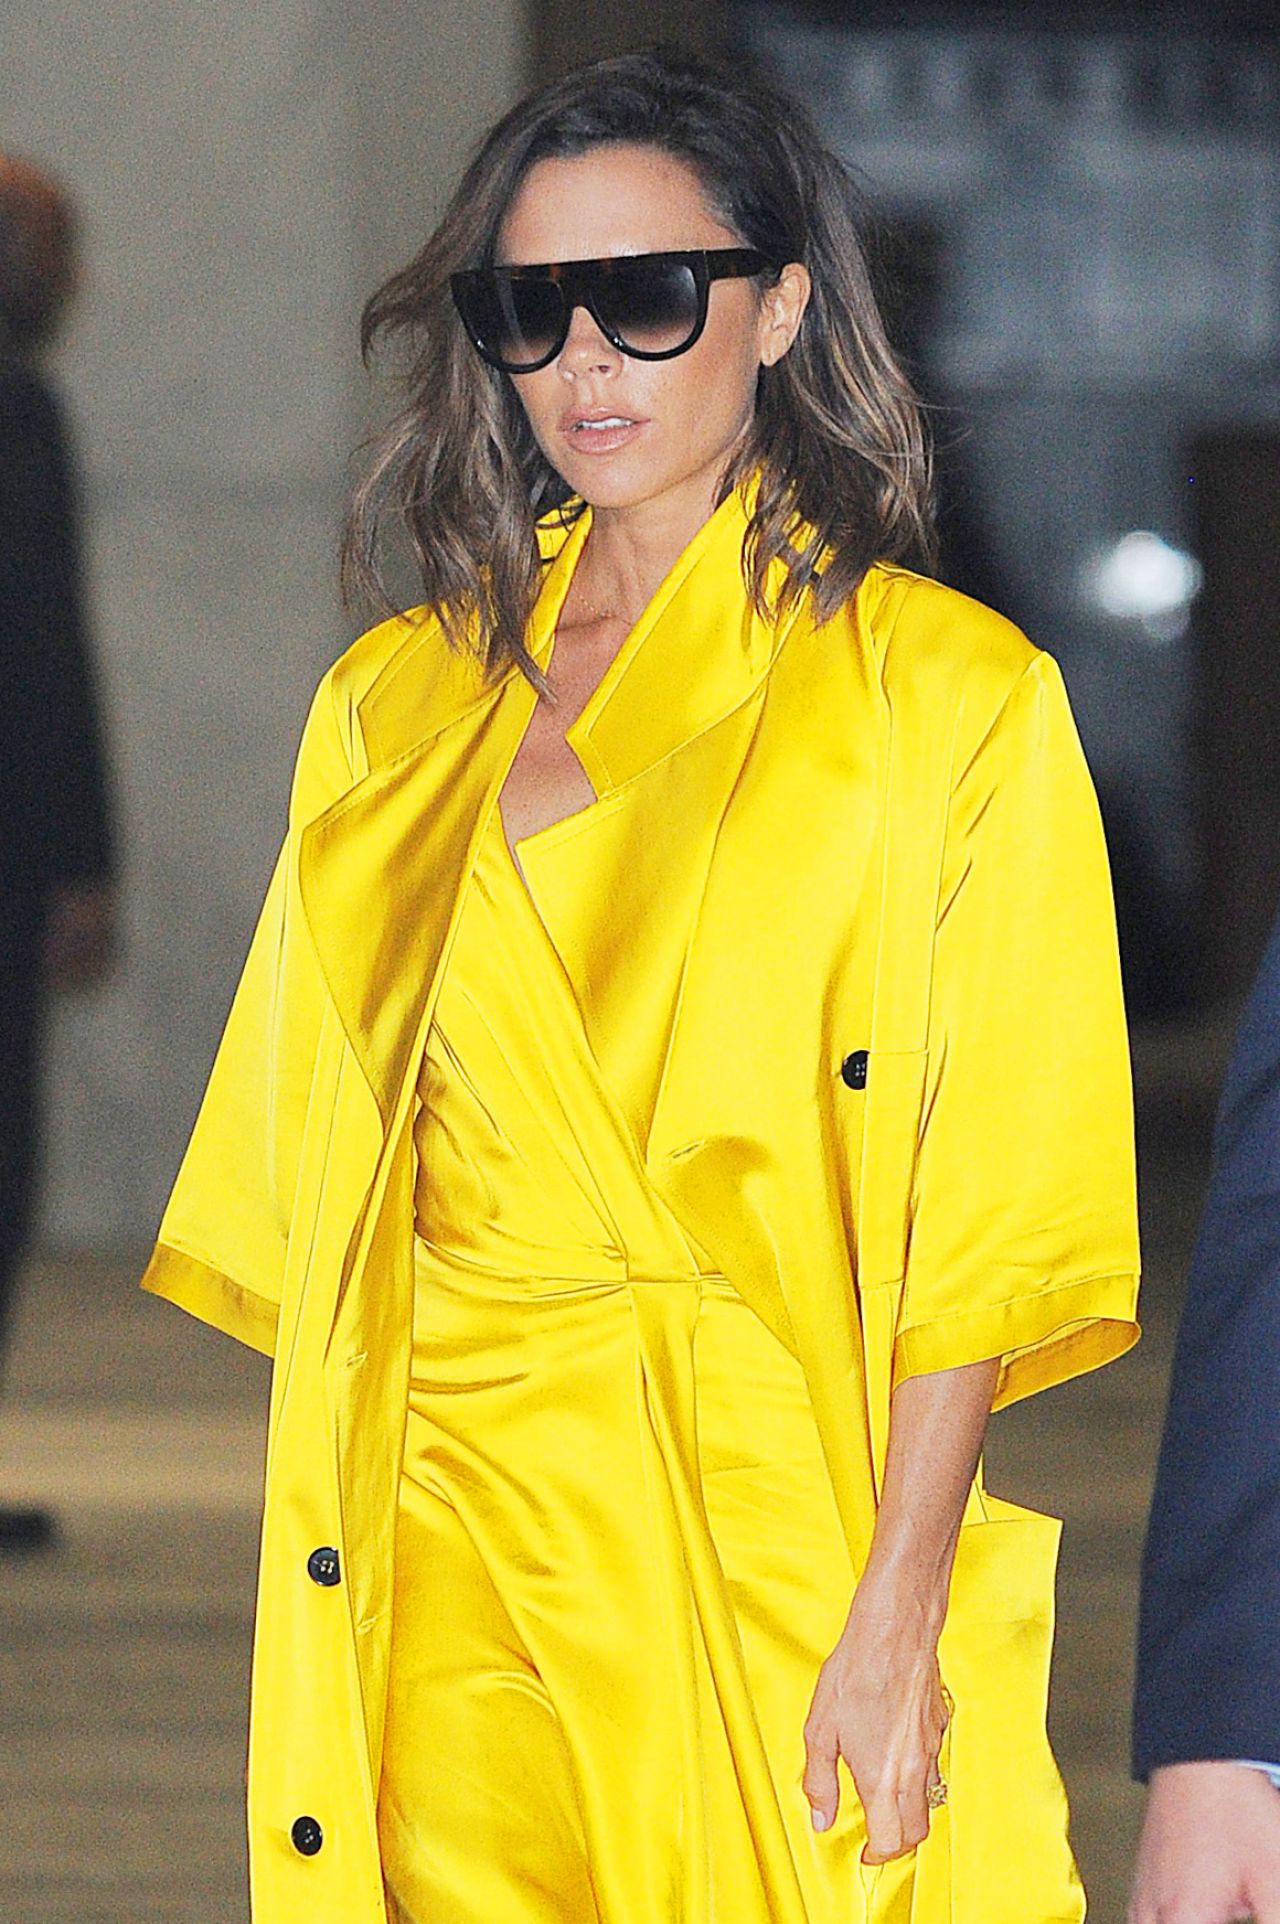 Victoria Beckham Chic Style - Arrives for a Meeting in Midtown, NYC 6 ...